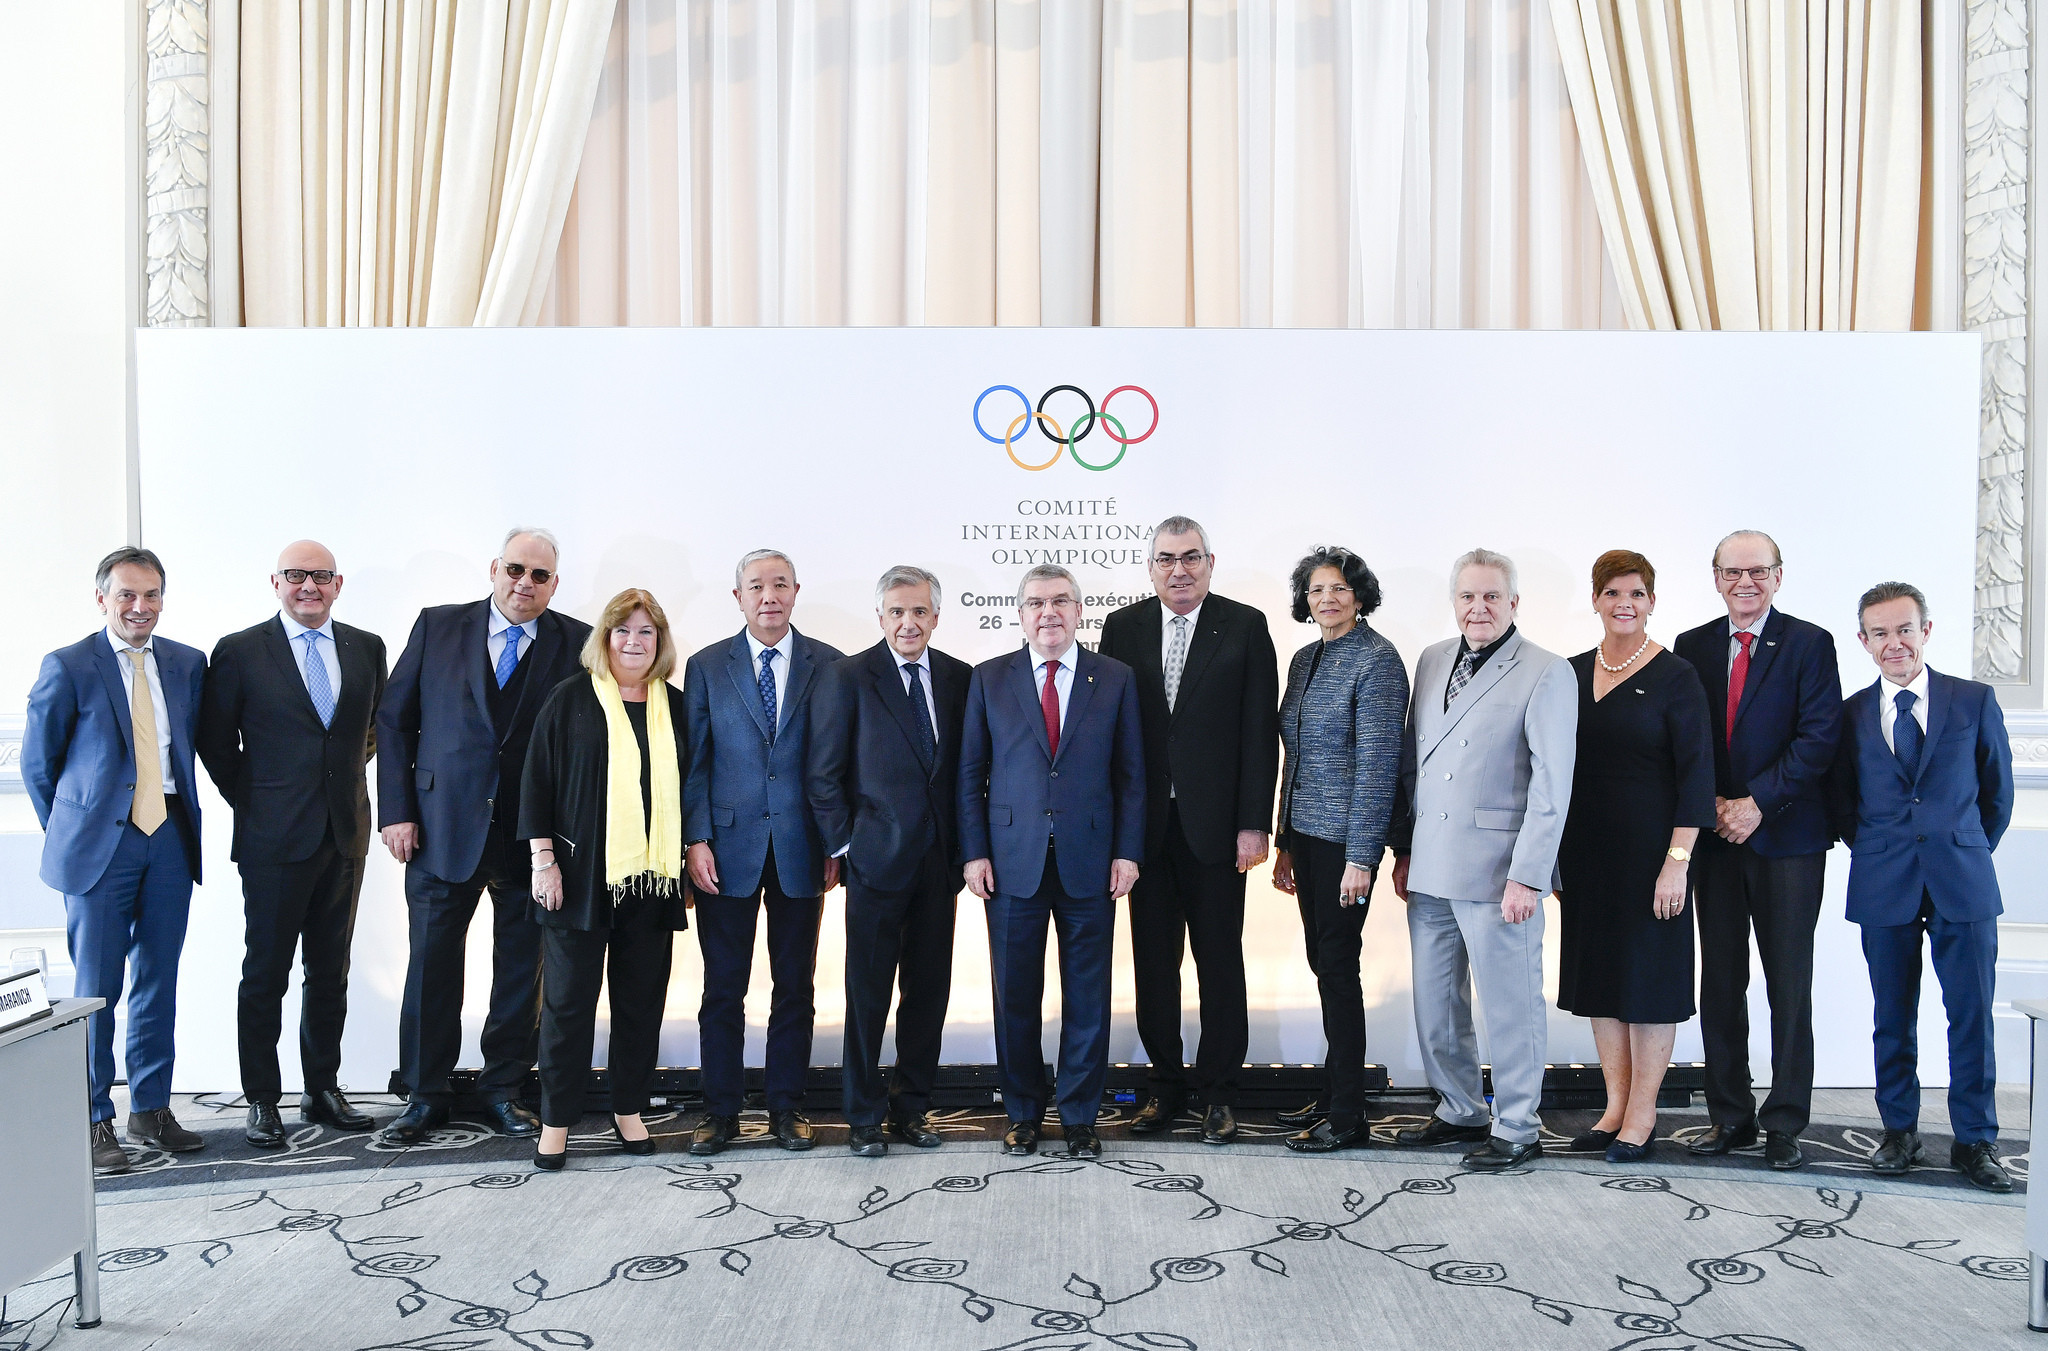 The IOC Executive Board will be presented with the full report from the Inquiry Committee into AIBA on May 22 ©IOC